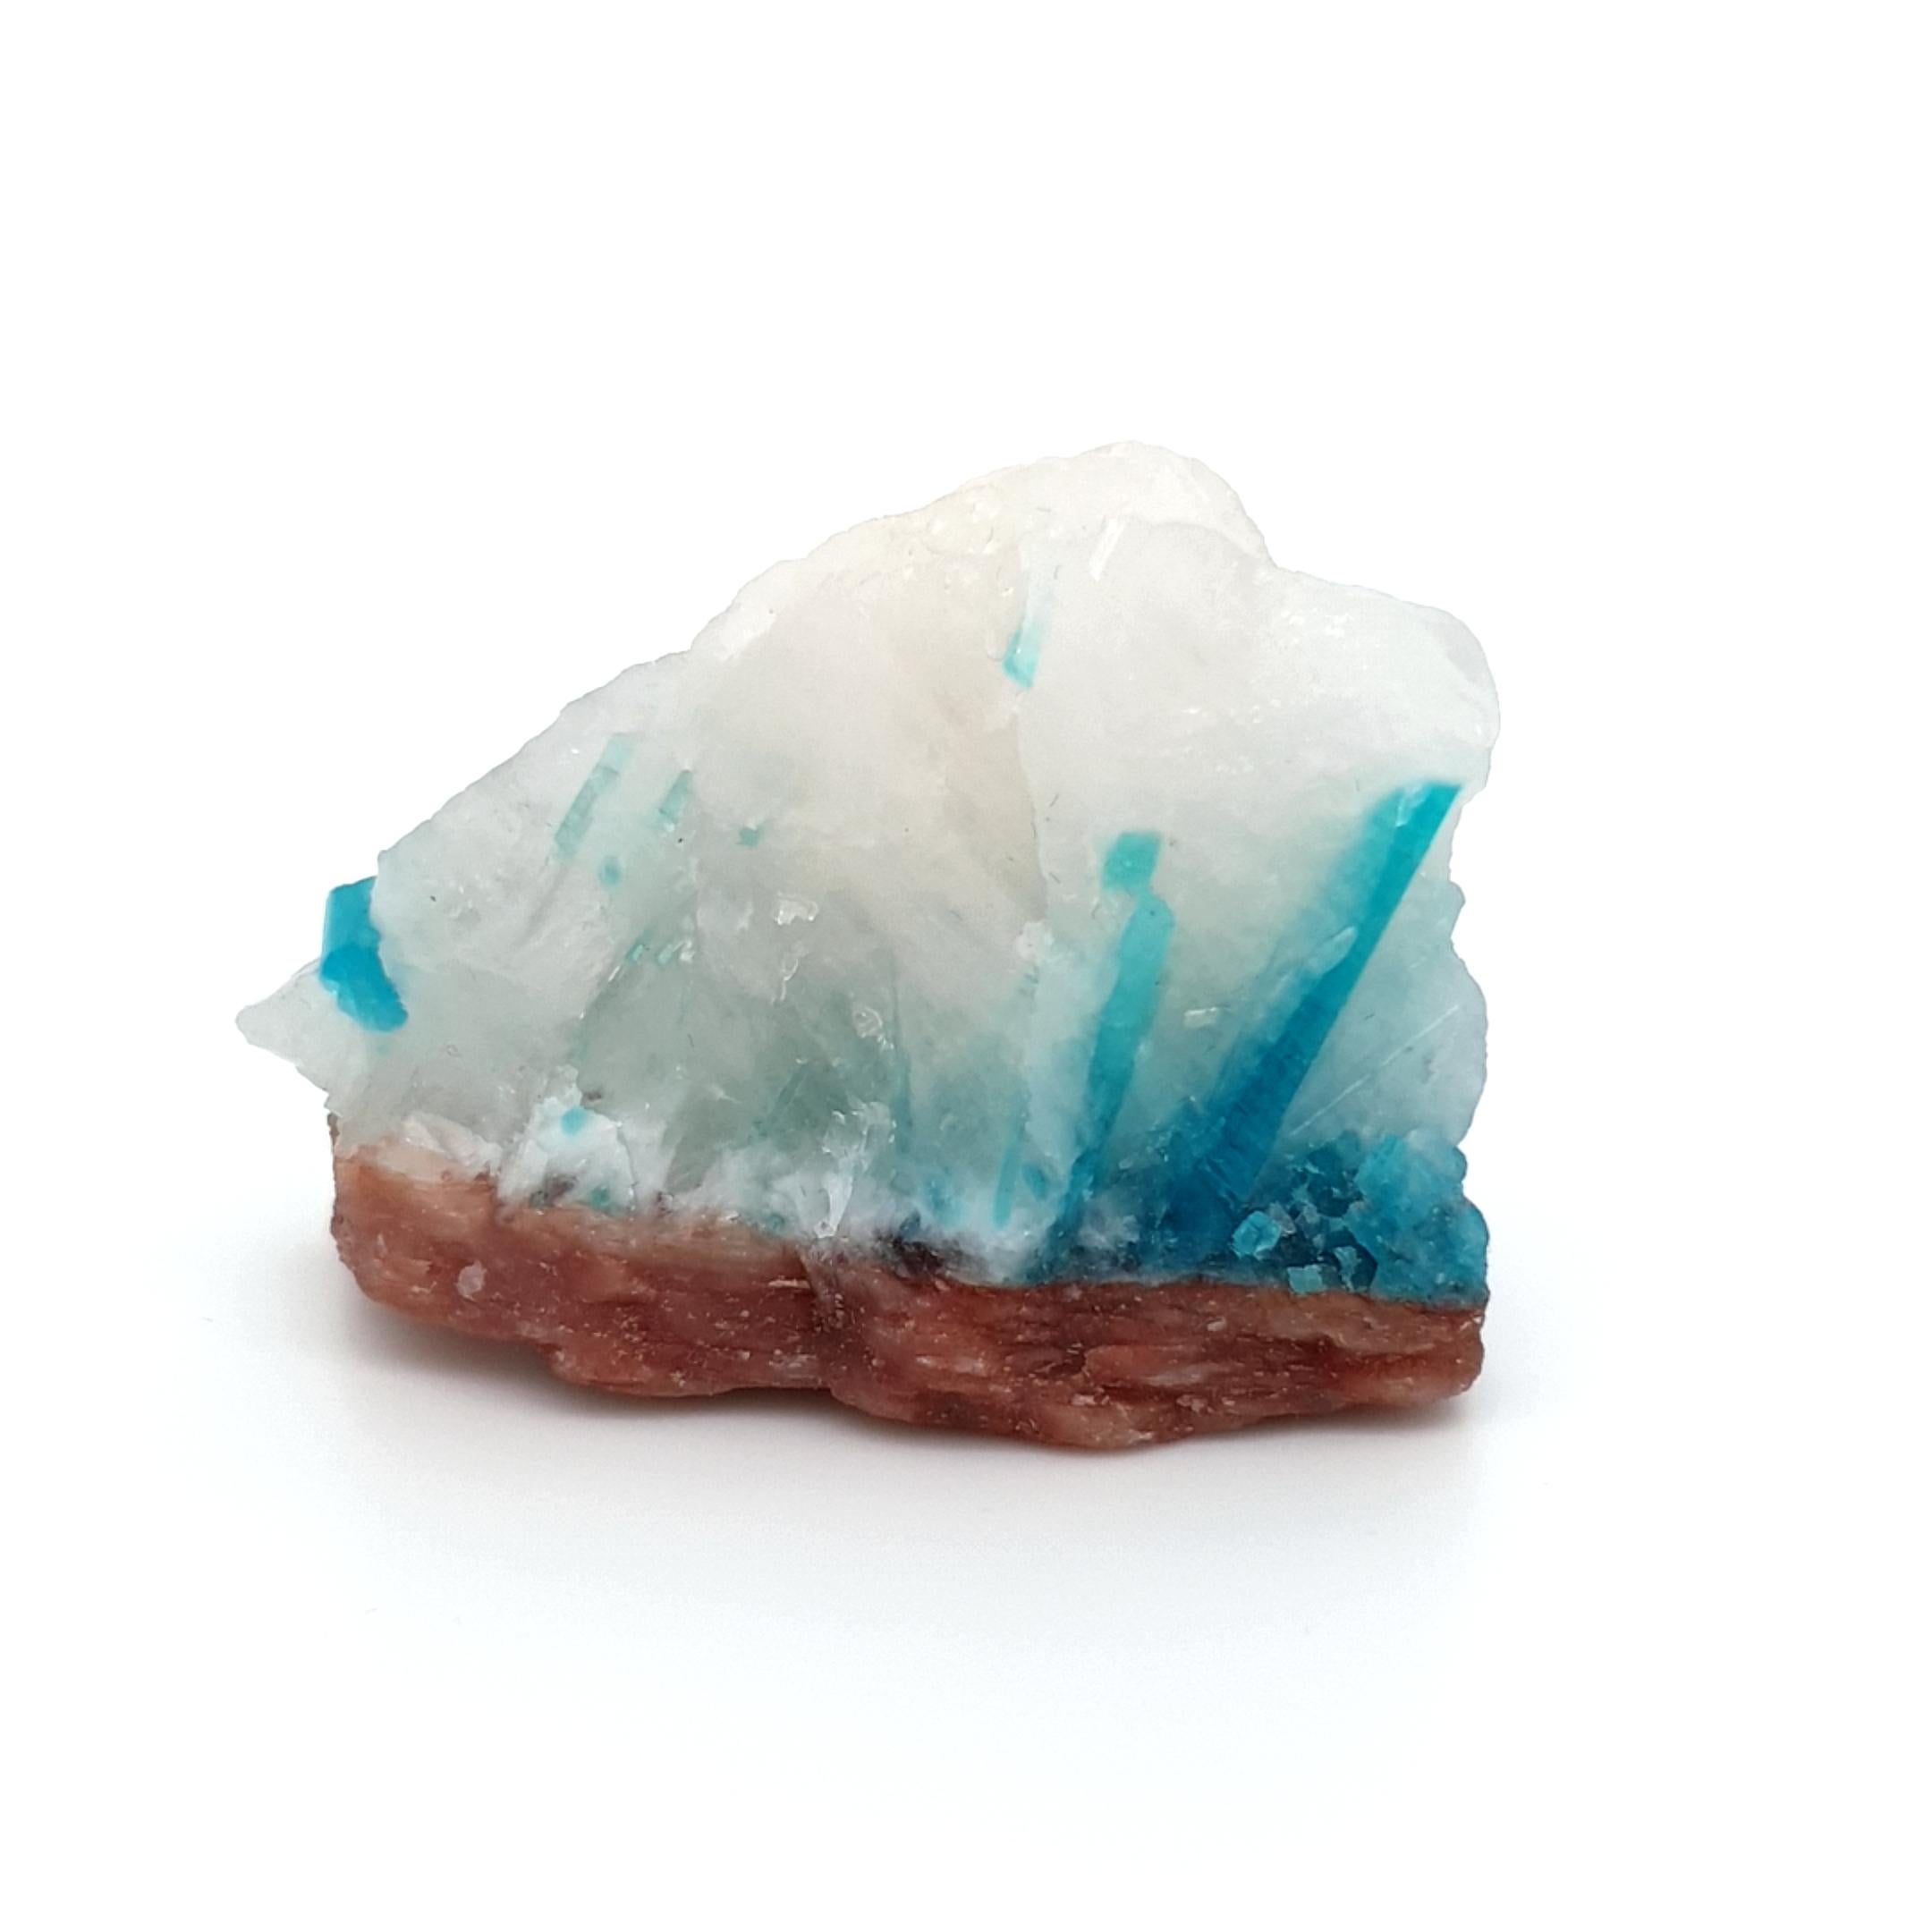 Paraiba Tourmaline is one of the most desirable varieties of the coveted mineral due to its unique and almost indescribable, amazing blue color.
These Specimen exhibits that incredible hue in the form of small crystals embedded in a matrix of